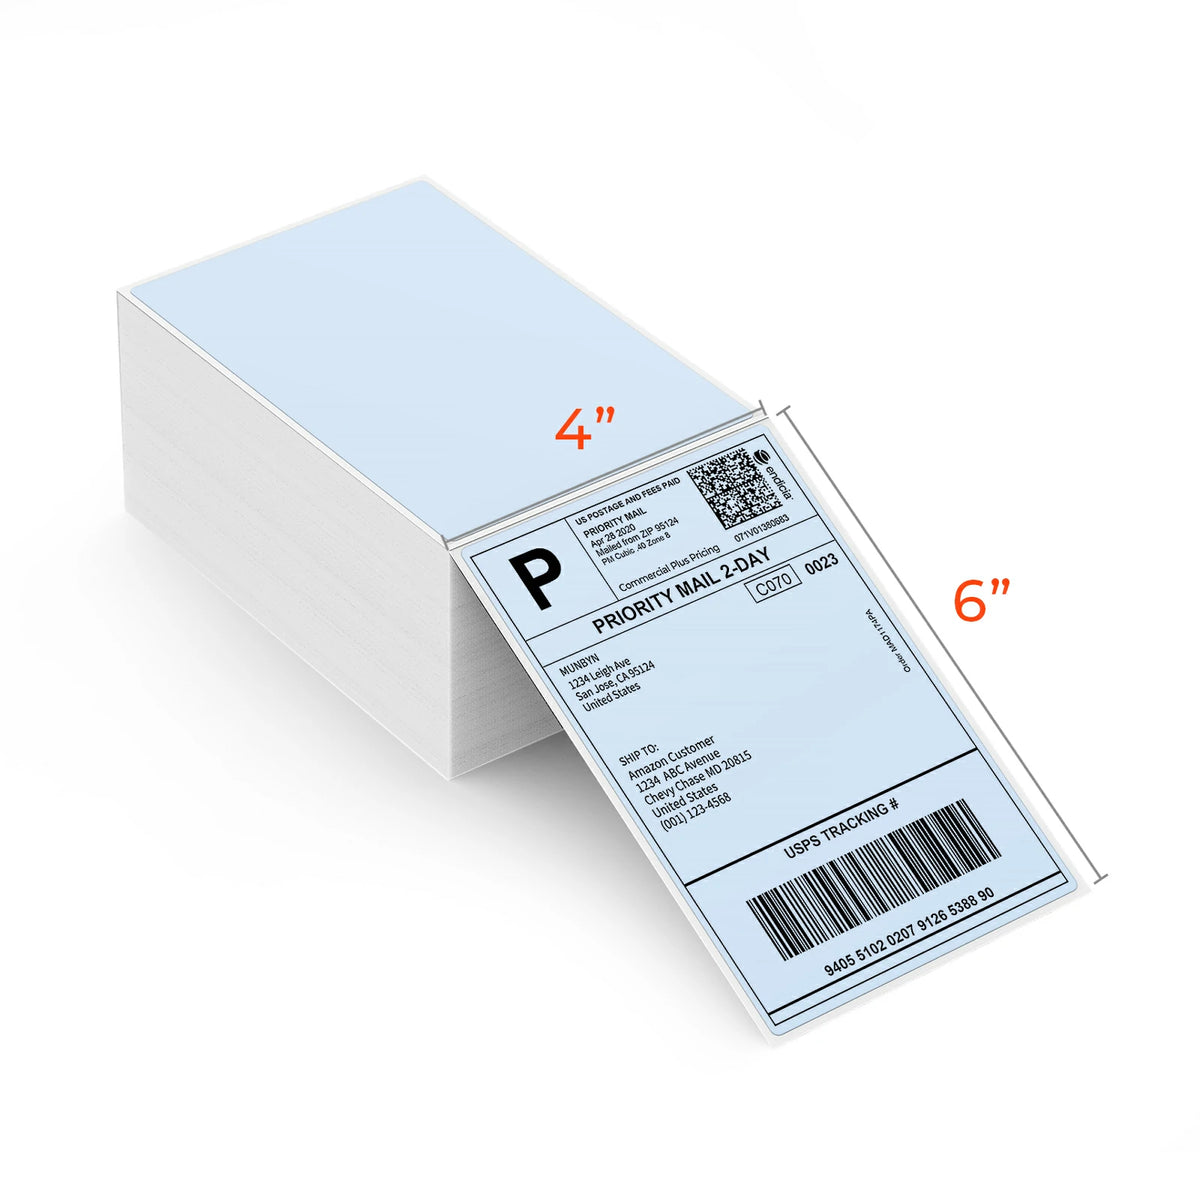 Measuring at 4x6 inches, these MUNBYN blue fanfold labels are perfect for printing shipping labels, packing slips, and barcodes.